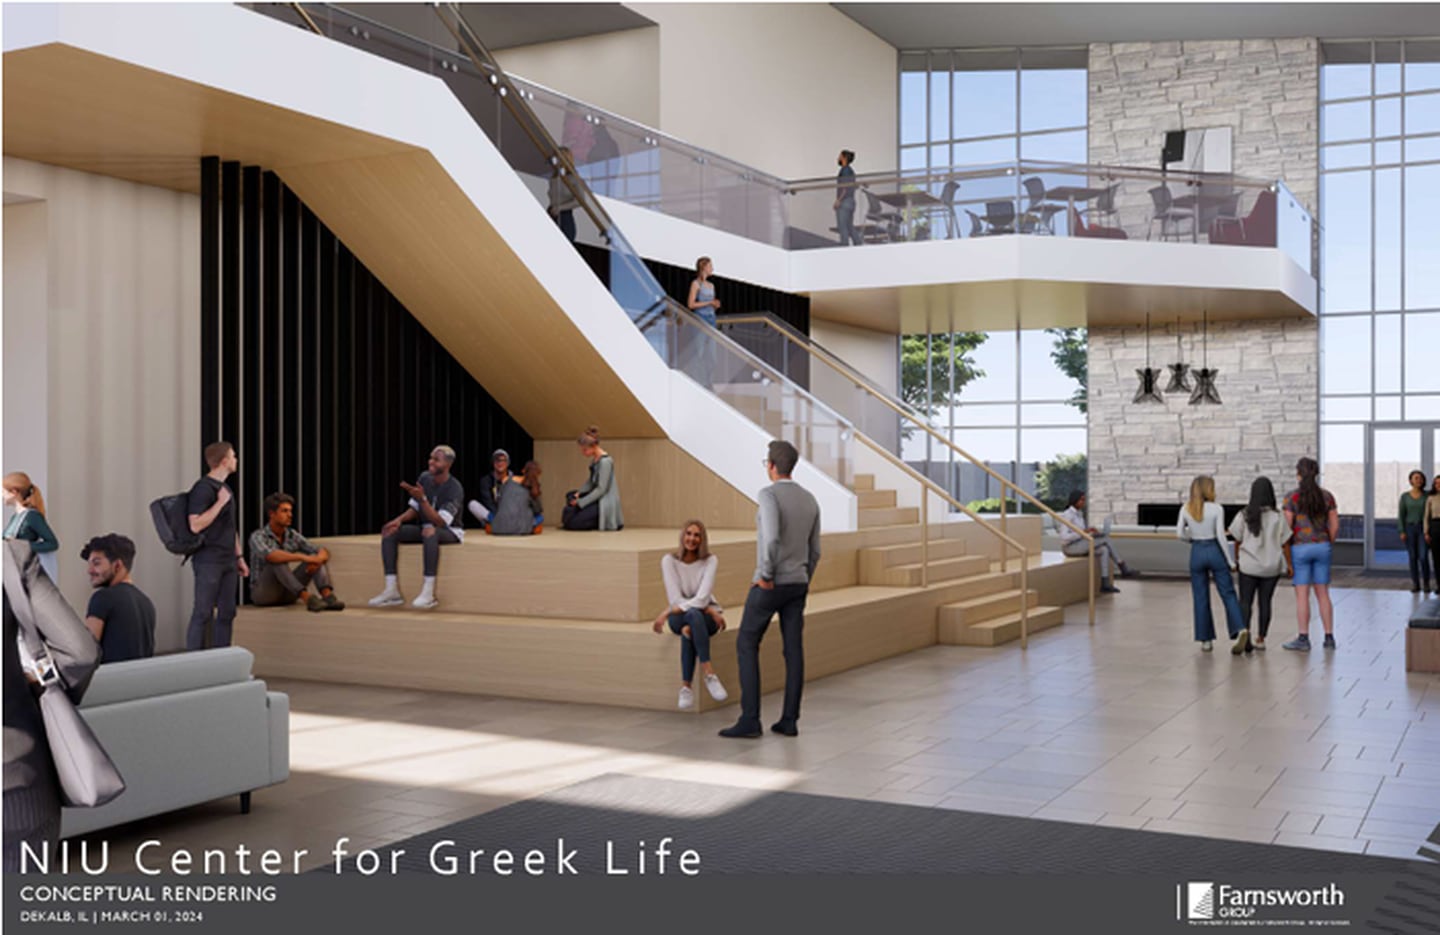 Concept art shows a view of the interior main lobby of the proposed NIU Center for Greek Life, planned for about 2 acres on city-owned property at Blackhawk Boulevard and West Hillcrest Drive. The project has received support from the city of DeKalb and NIU Foundation. Concept art by Lisle-based Farnsworth Group published by city of DeKalb in March 2024.